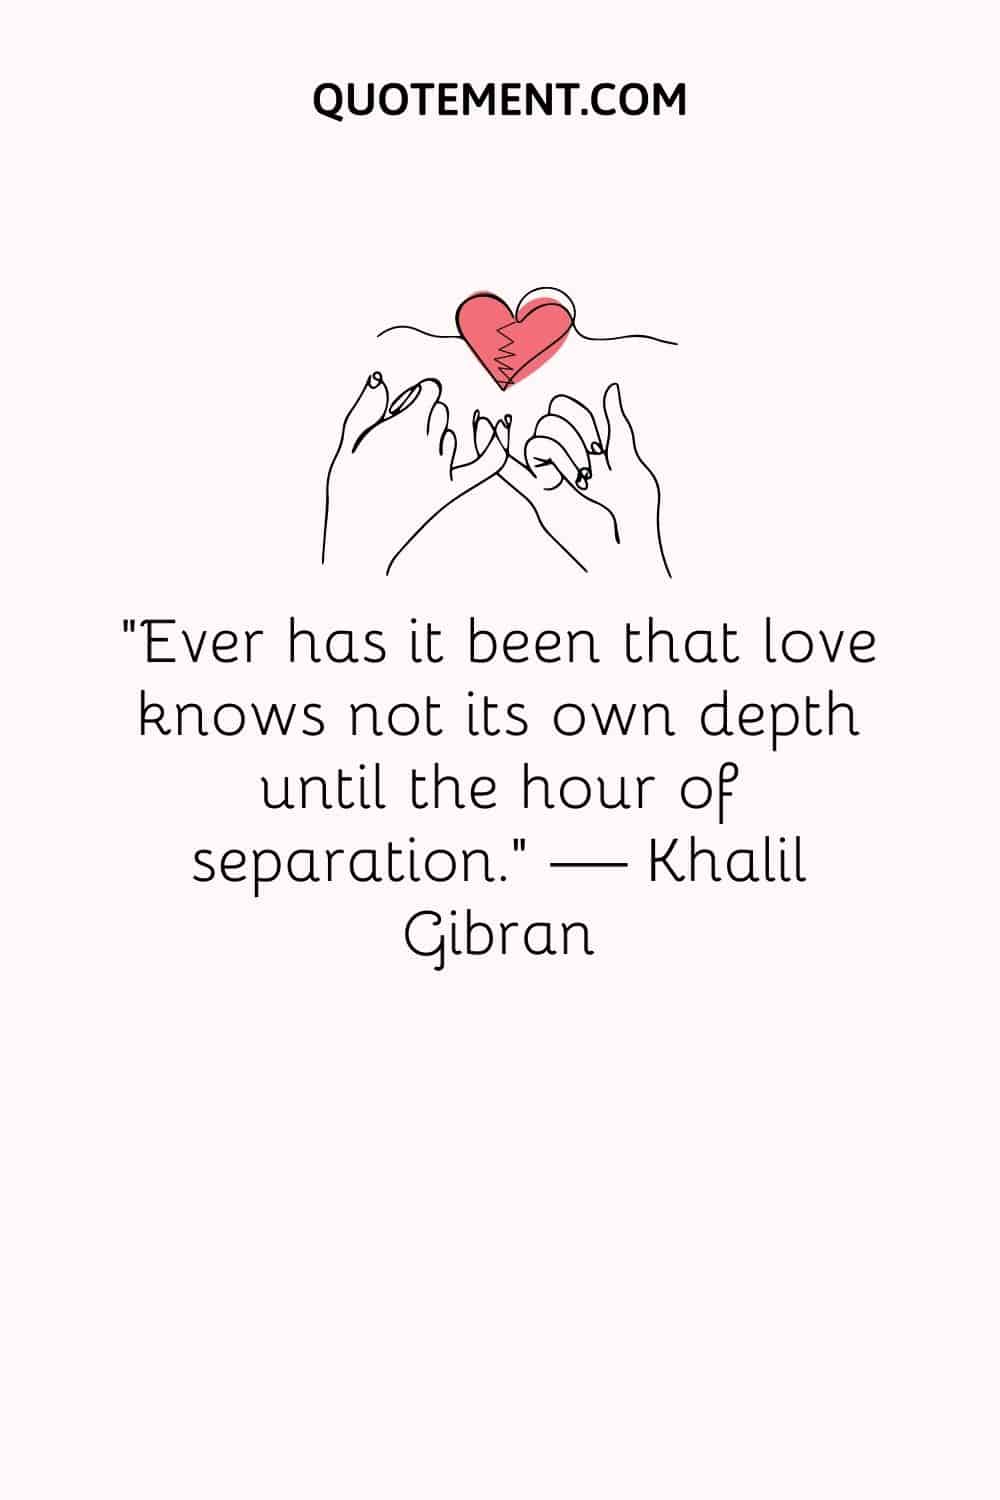 Ever has it been that love knows not its own depth until the hour of separation